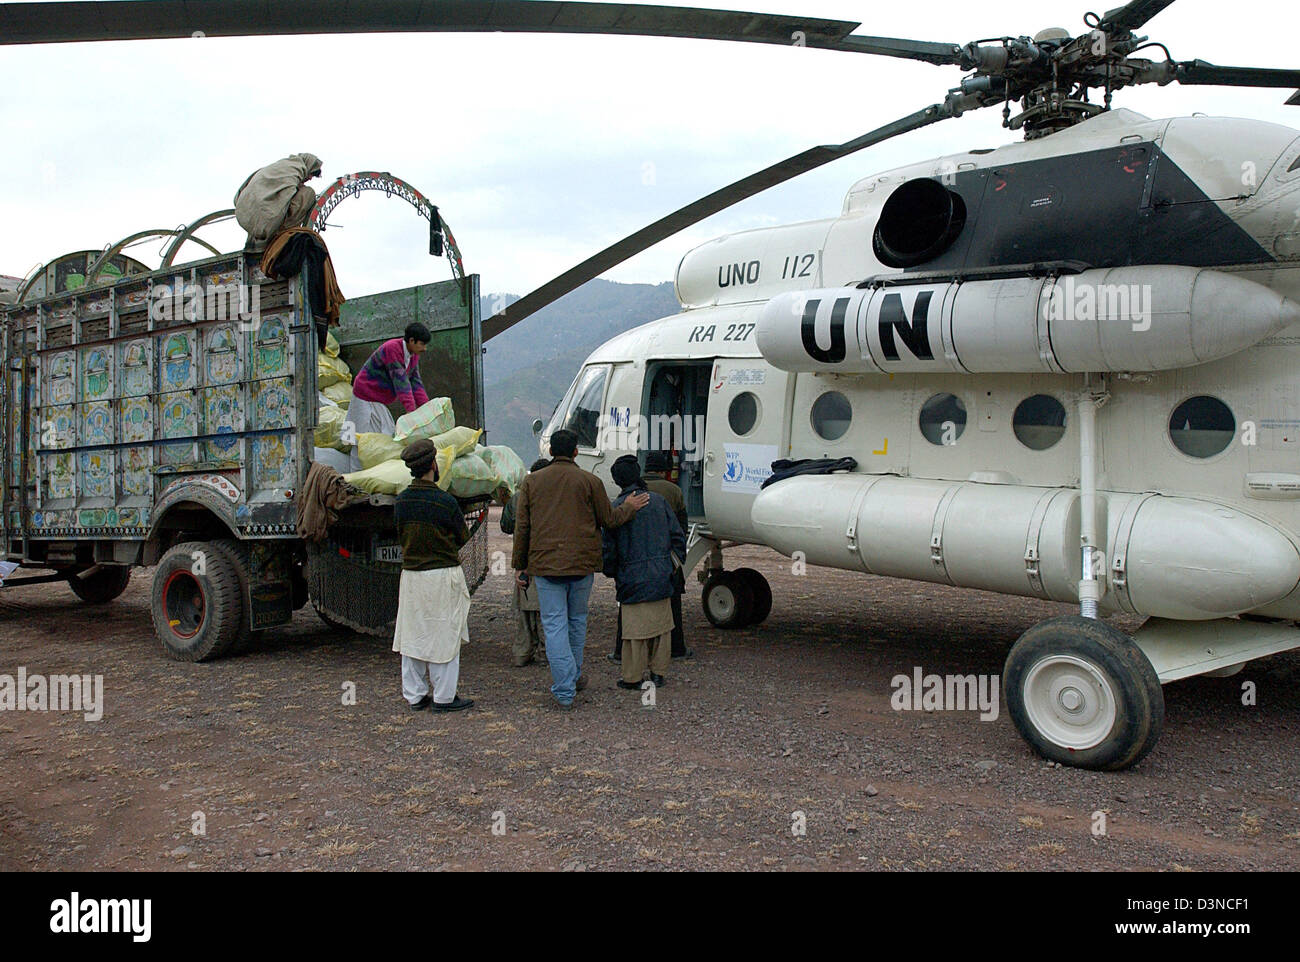 Local mountain dwellers load bags of aid supplies onto a Russian helicopter near  Muzaffarabad in Pakistan, Monday, 30 January 2006. Millions of people suffered in the aftermath of an earthquake which struck in October 2005 hitting the province of Kashmir. Photo: Wolfgang Langenstrassen Stock Photo